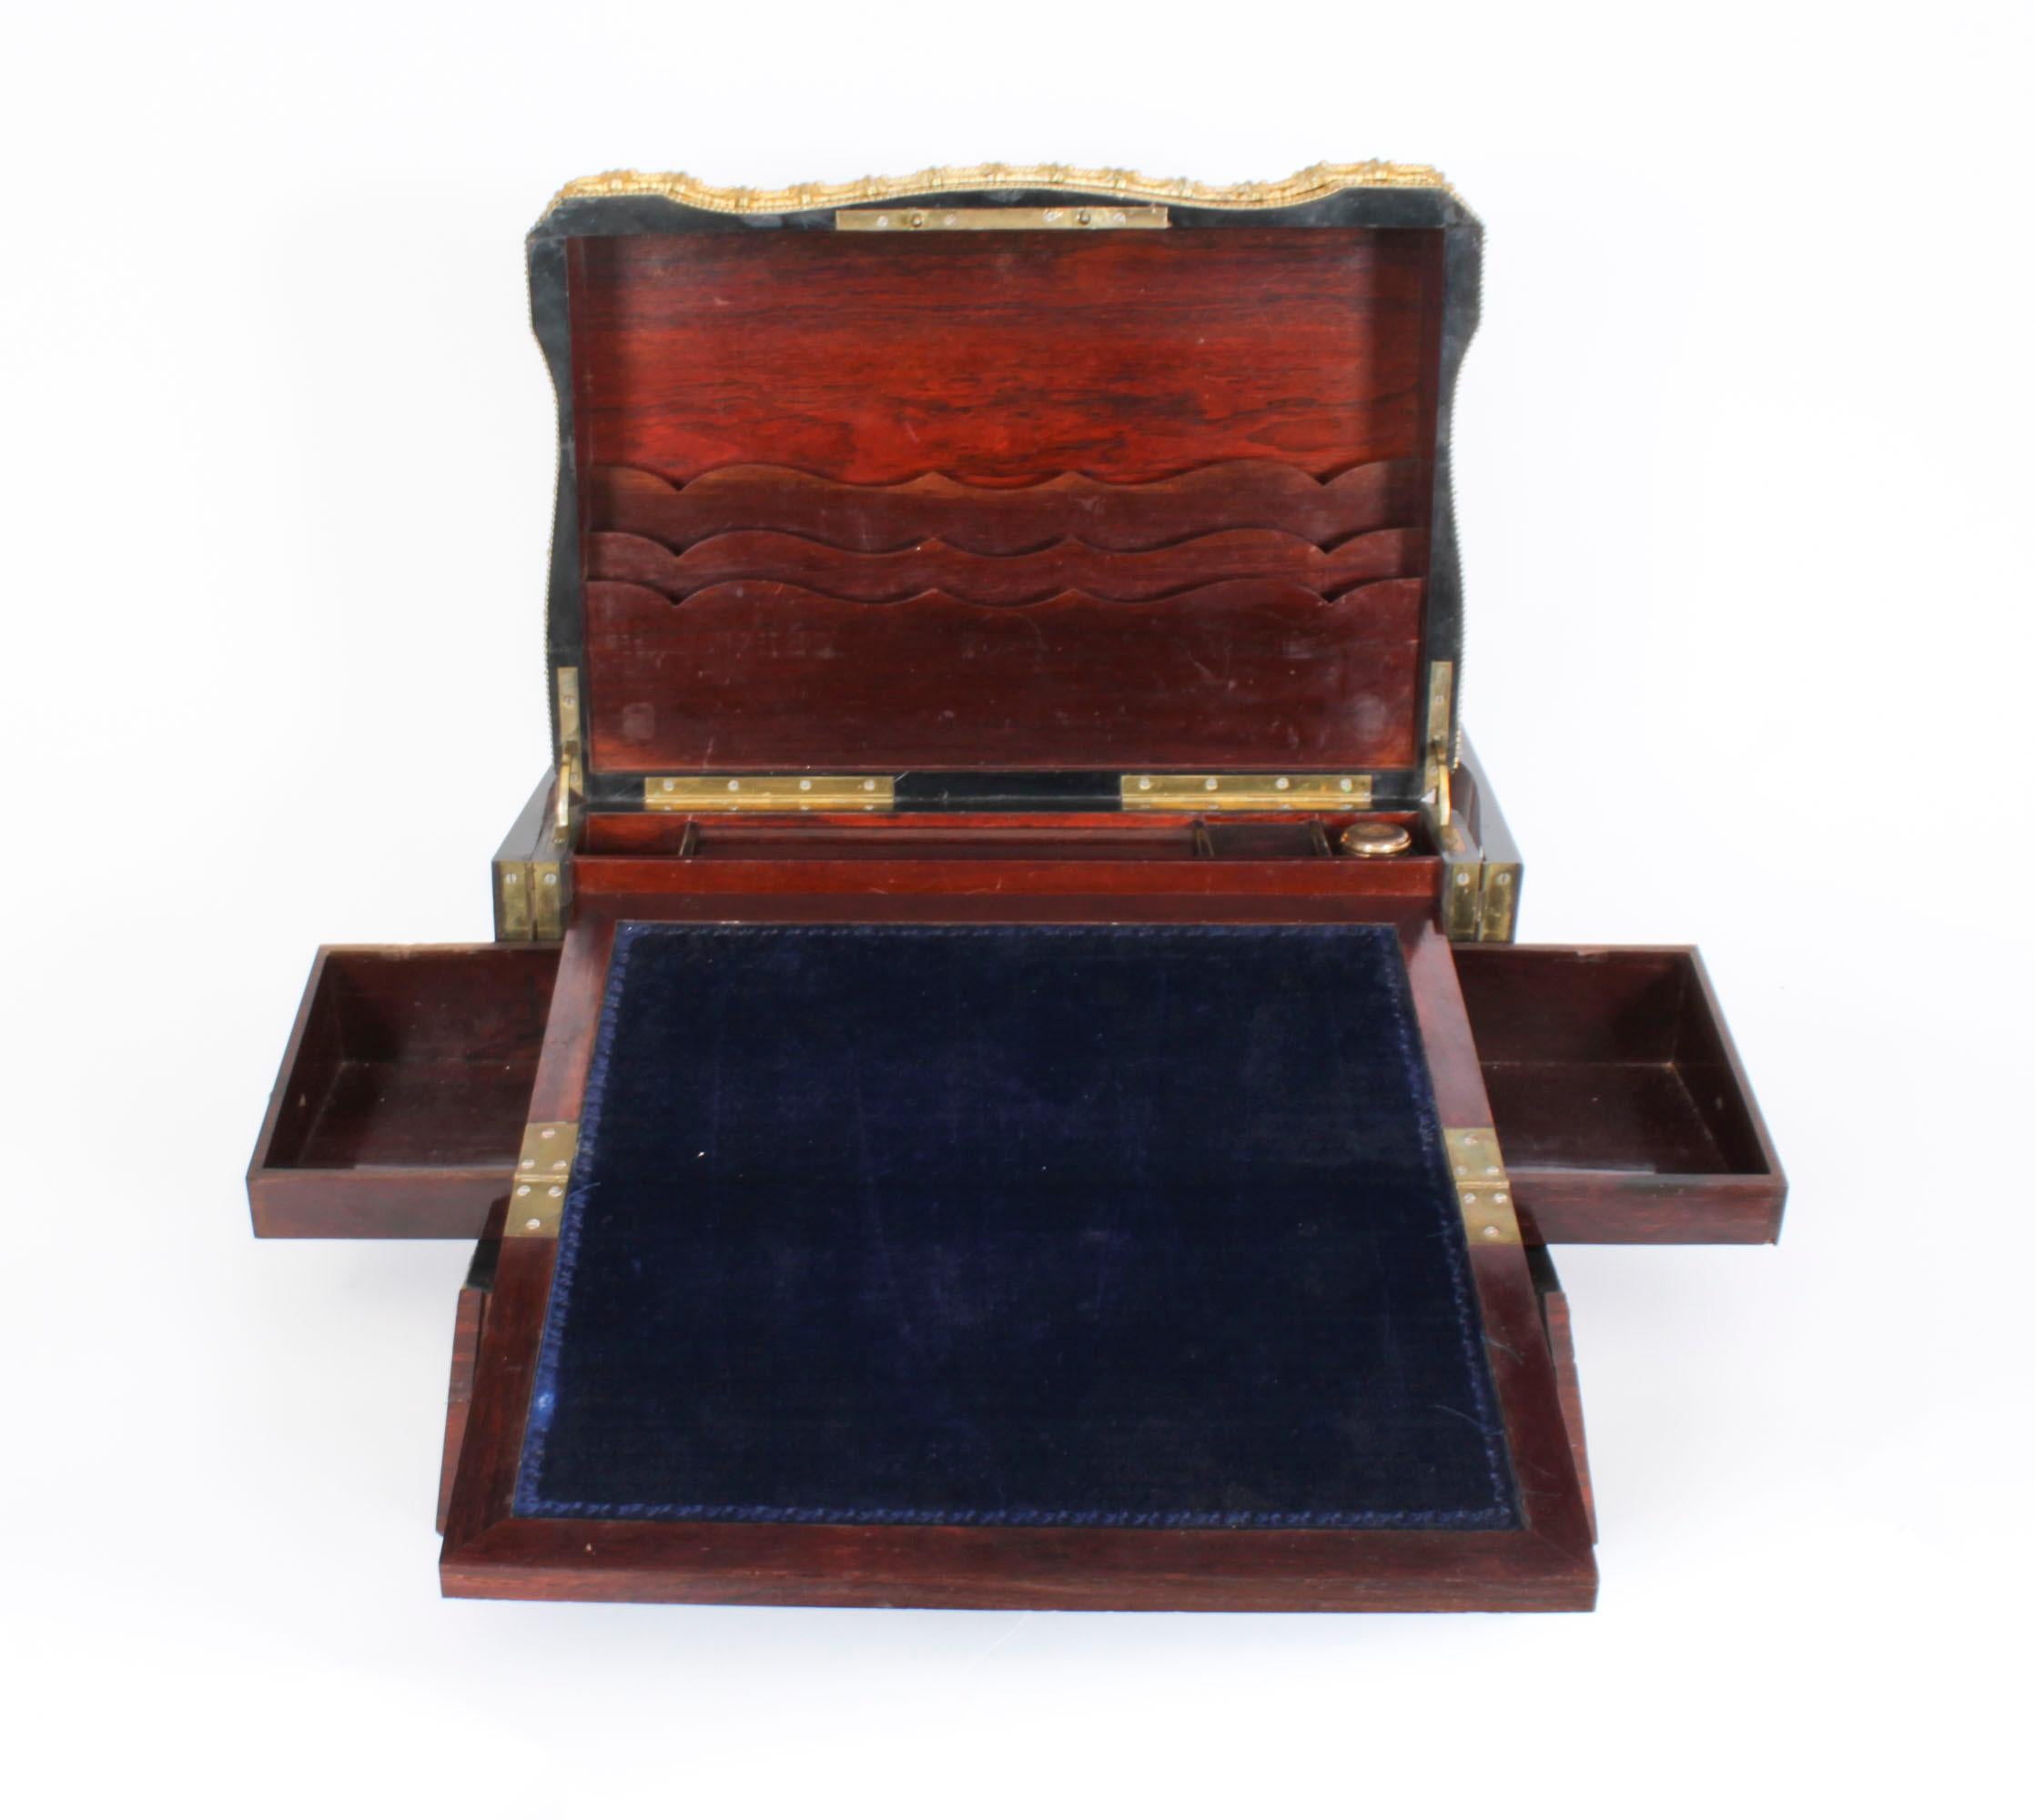 A French ormolu and porcelain cameo mounted amboyna writing box,  circa 1860 in date.

The rectangular casket features a lid with a central floral hand painted porcelain panel, crossbanding with ormolu decoration, opening to a fitted interior with a